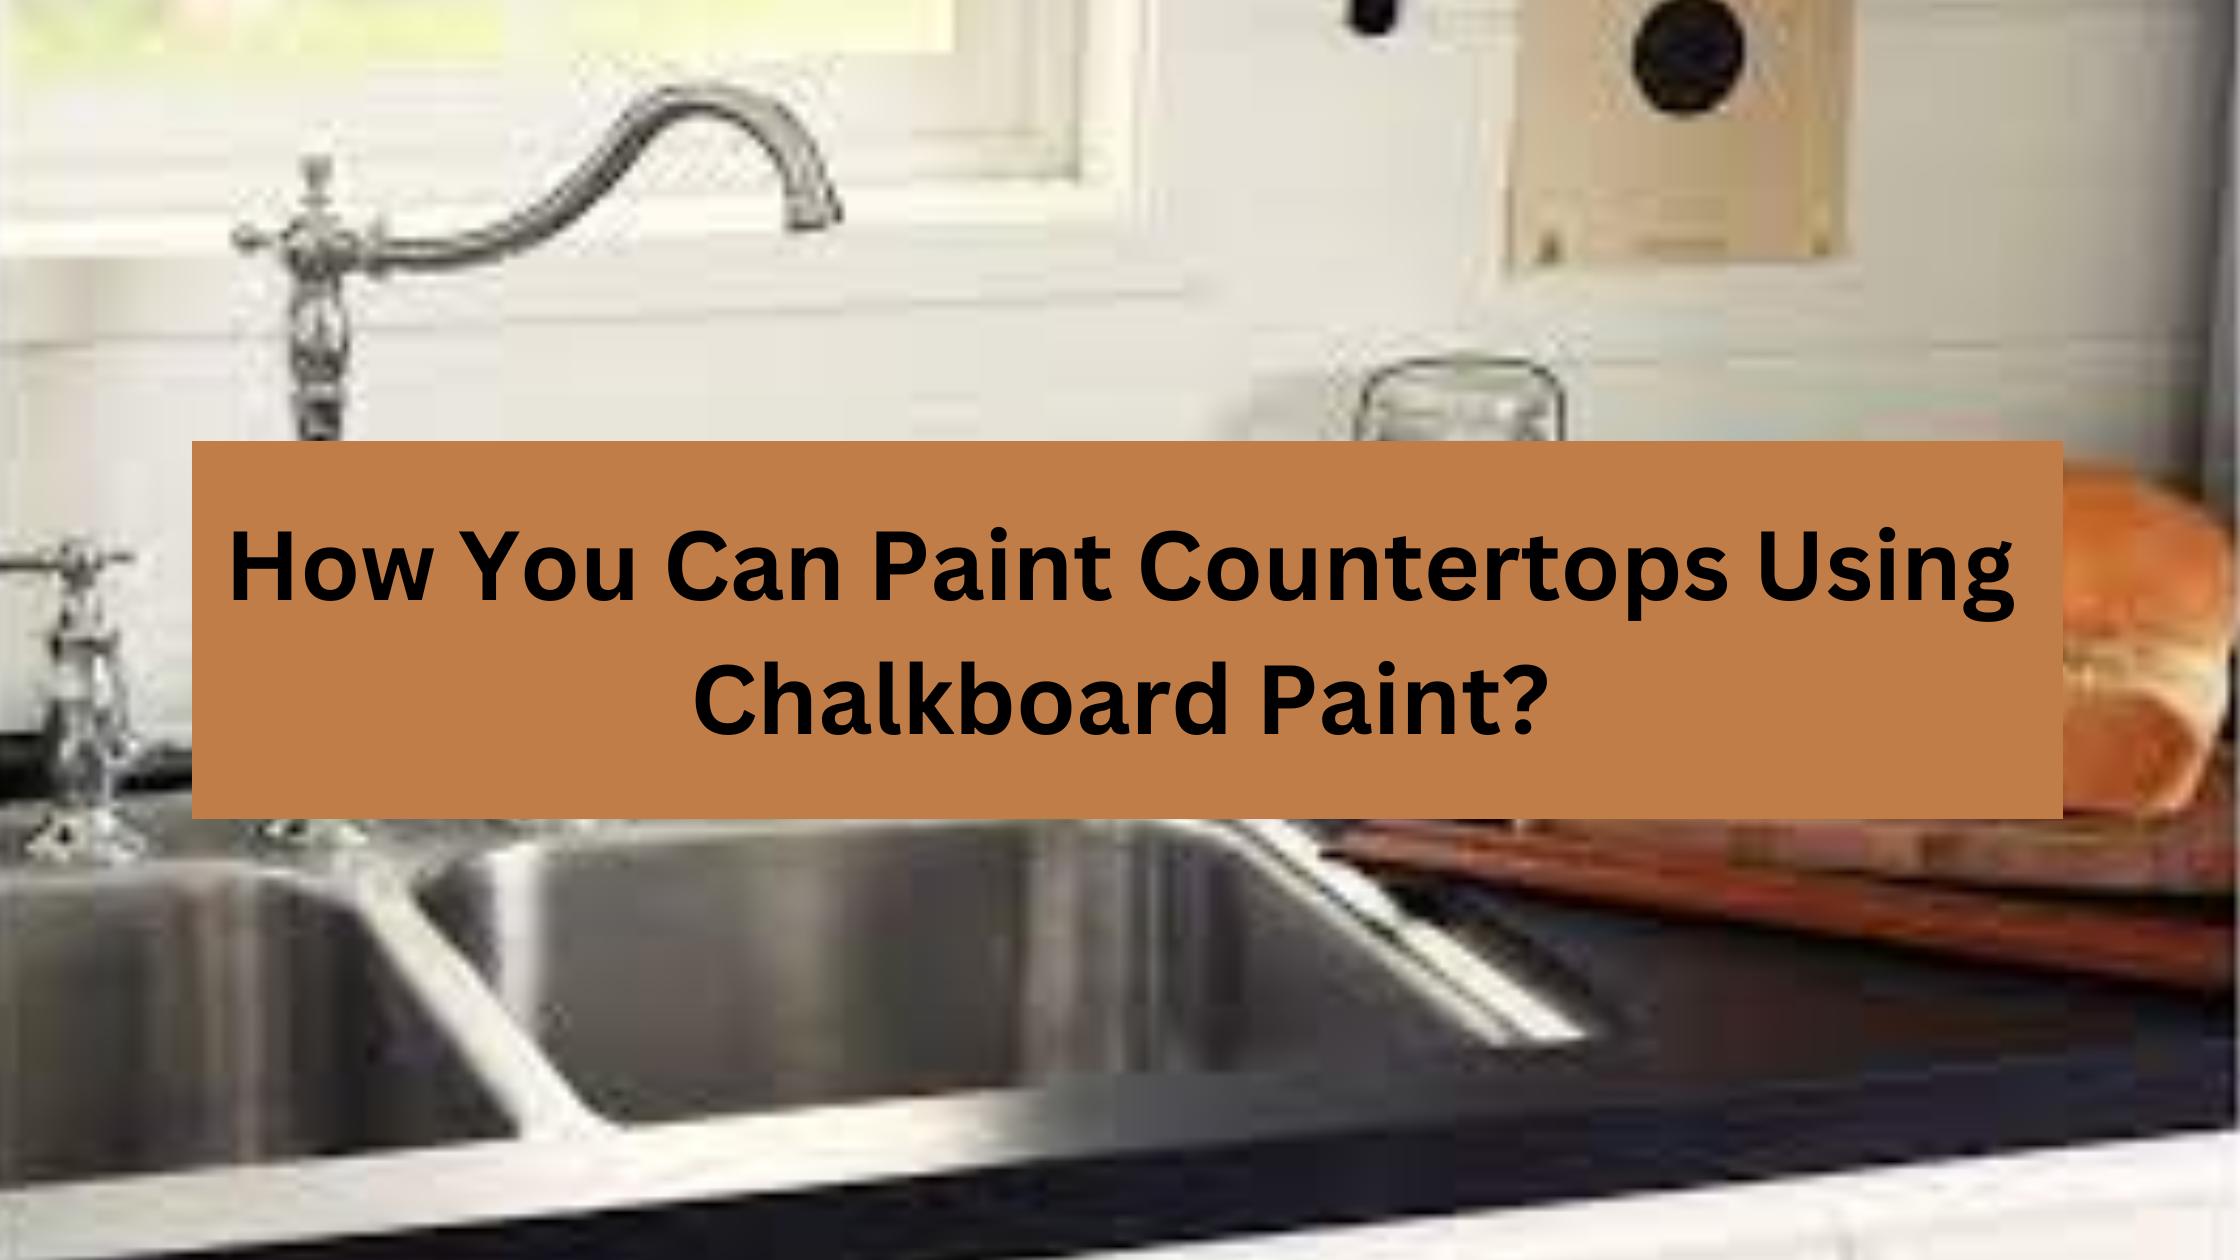 How You Can Paint Countertops Using Chalkboard Paint?